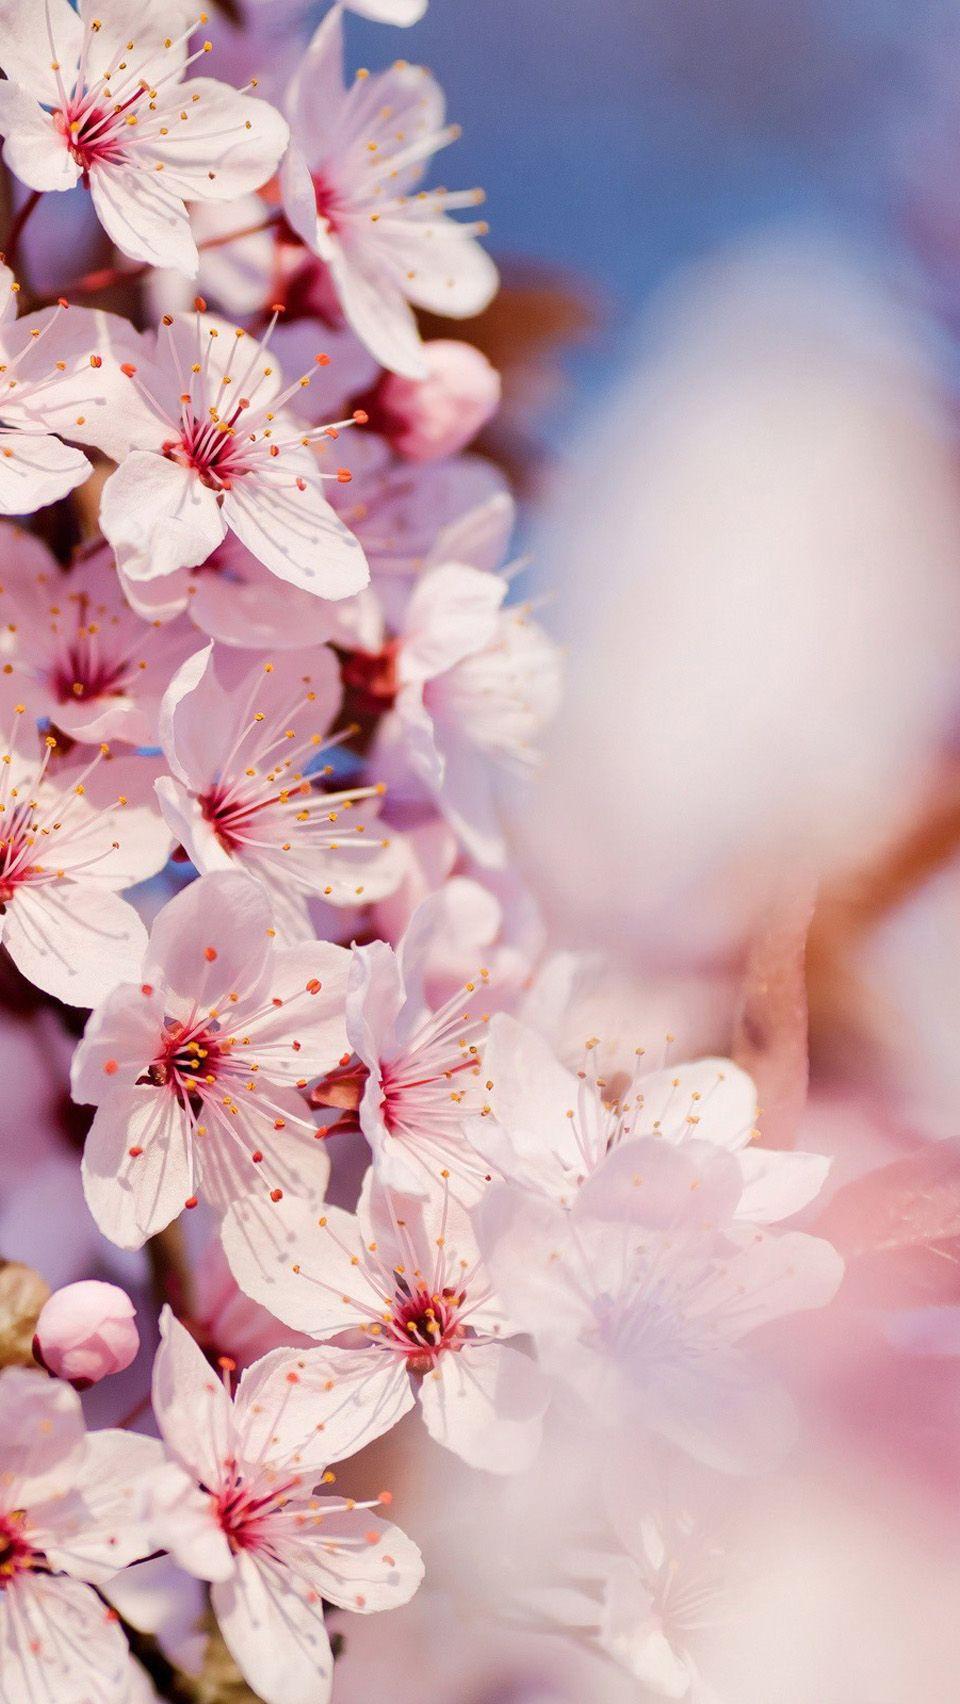 Japanese Cherry Blossom Wallpapers - Top Free Japanese Cherry Blossom ...